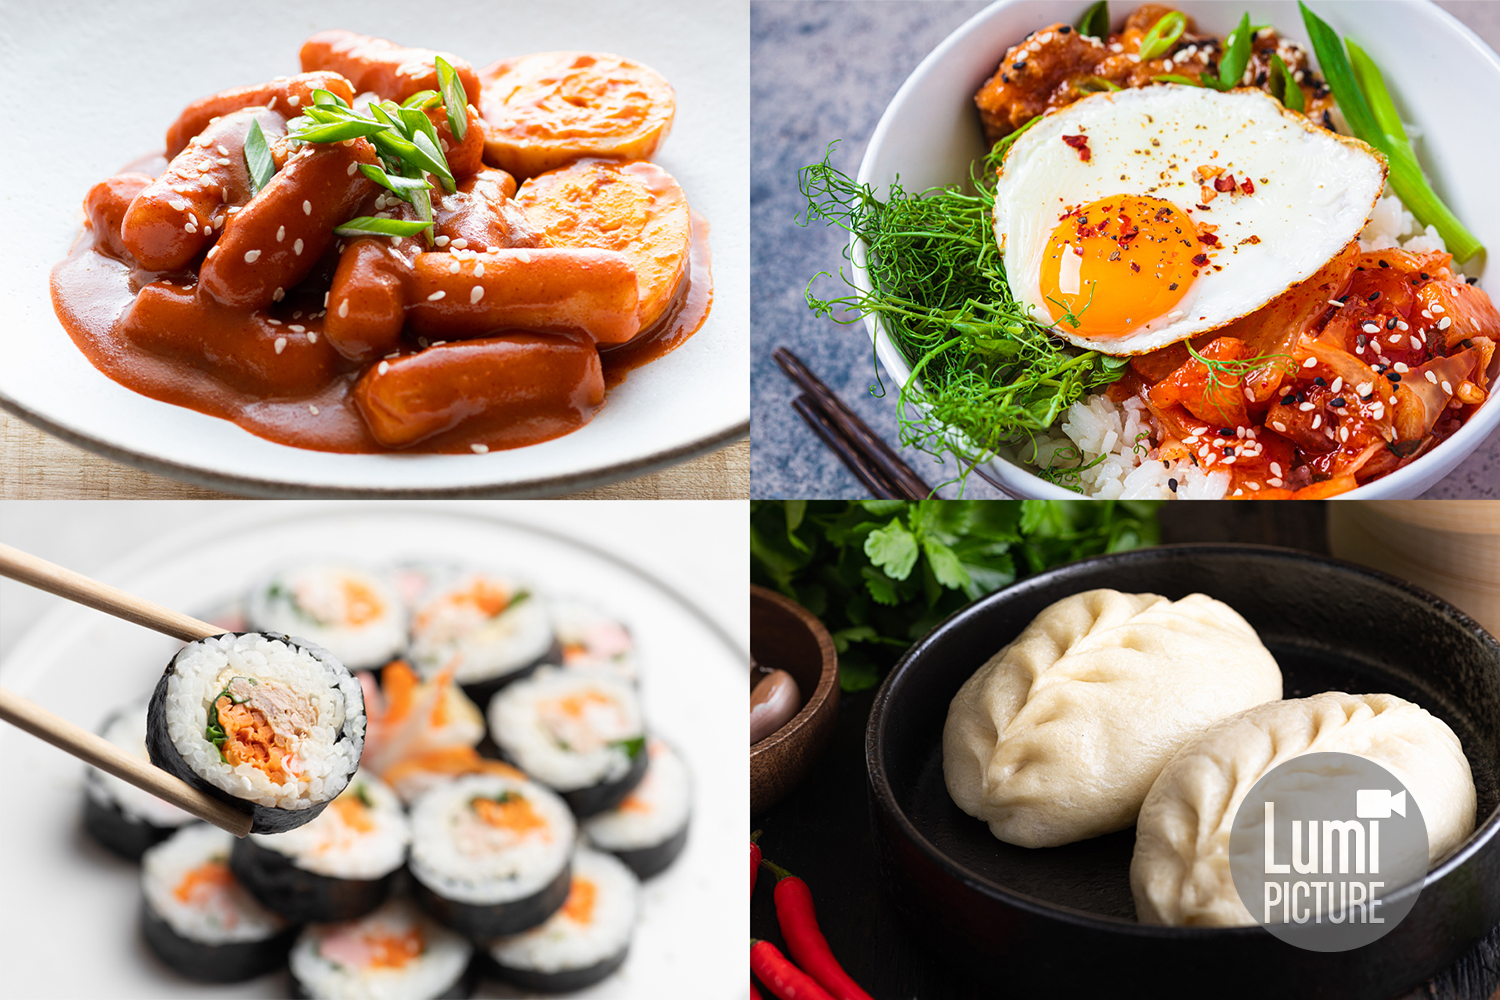 Lumi Picture Asian Food Photography